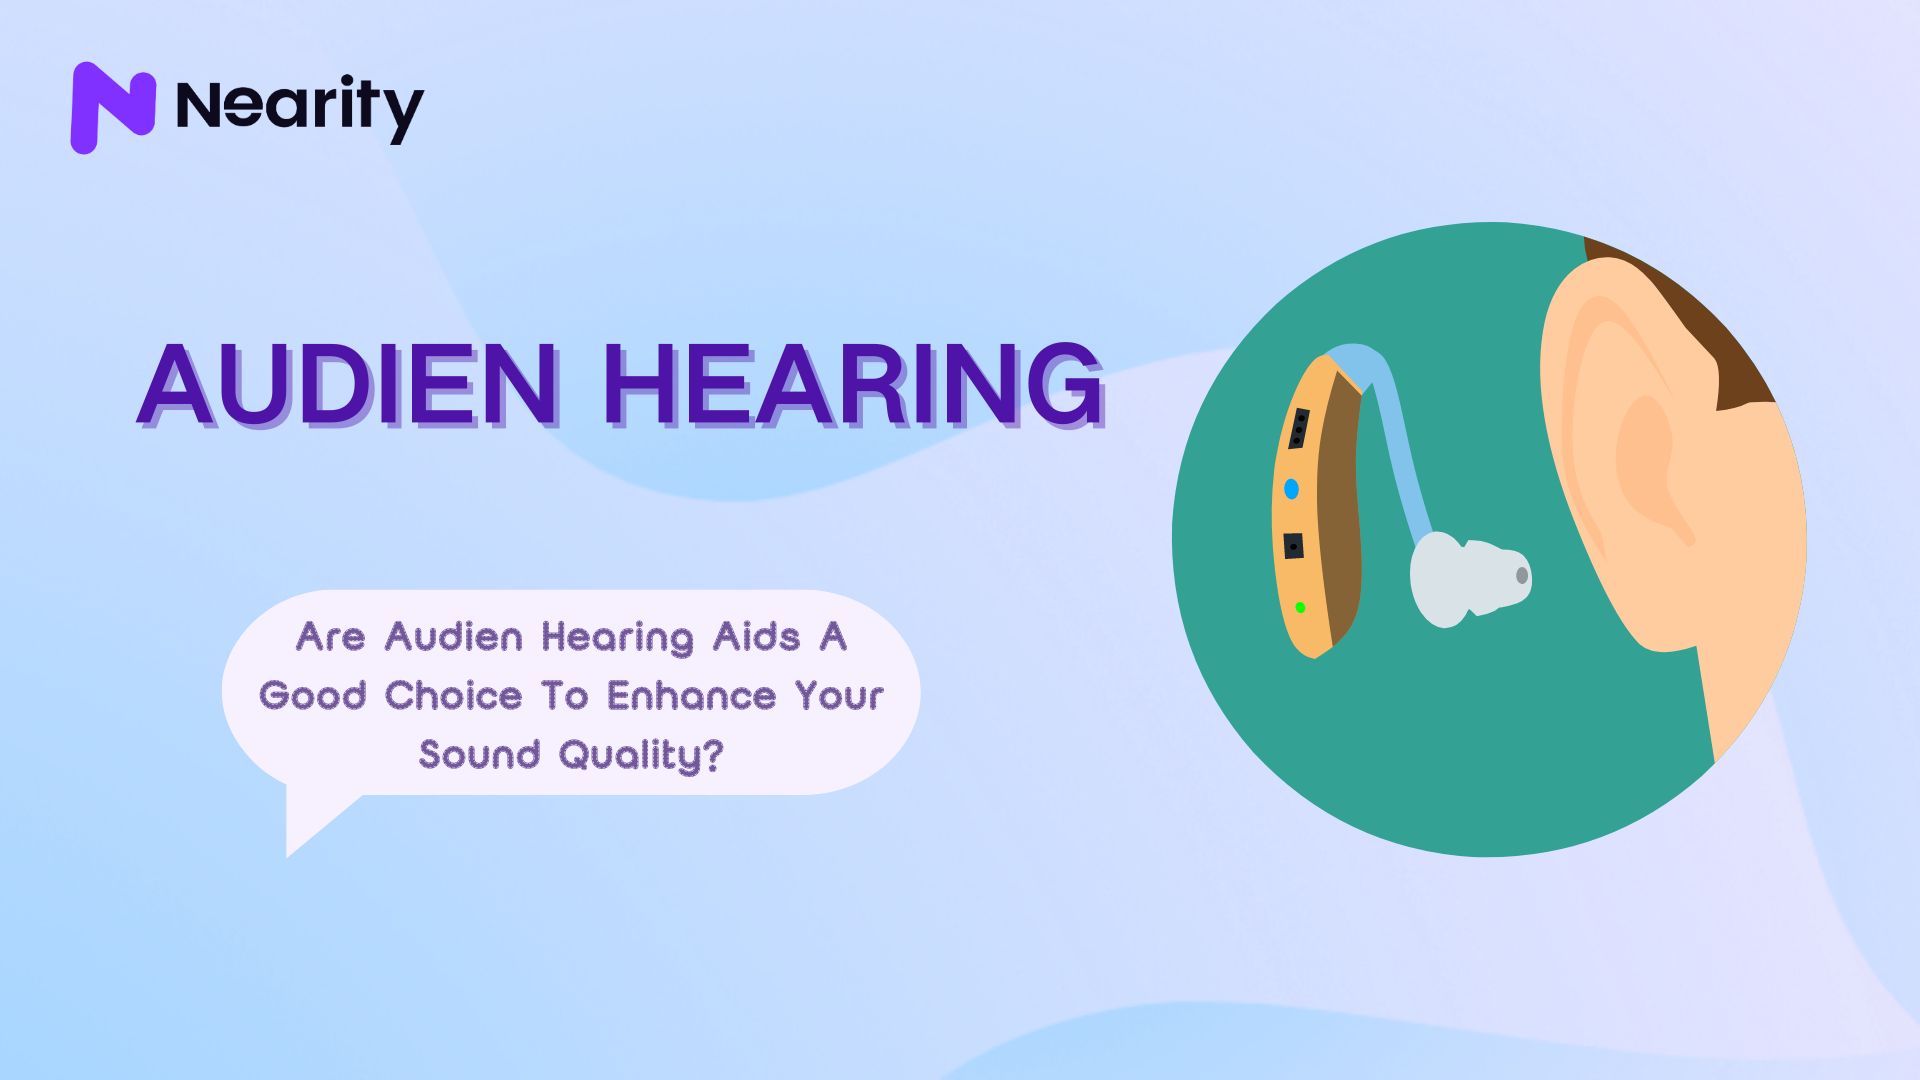 Are Audien Hearing Aids A Good Choice To Enhance Your Sound Quality?